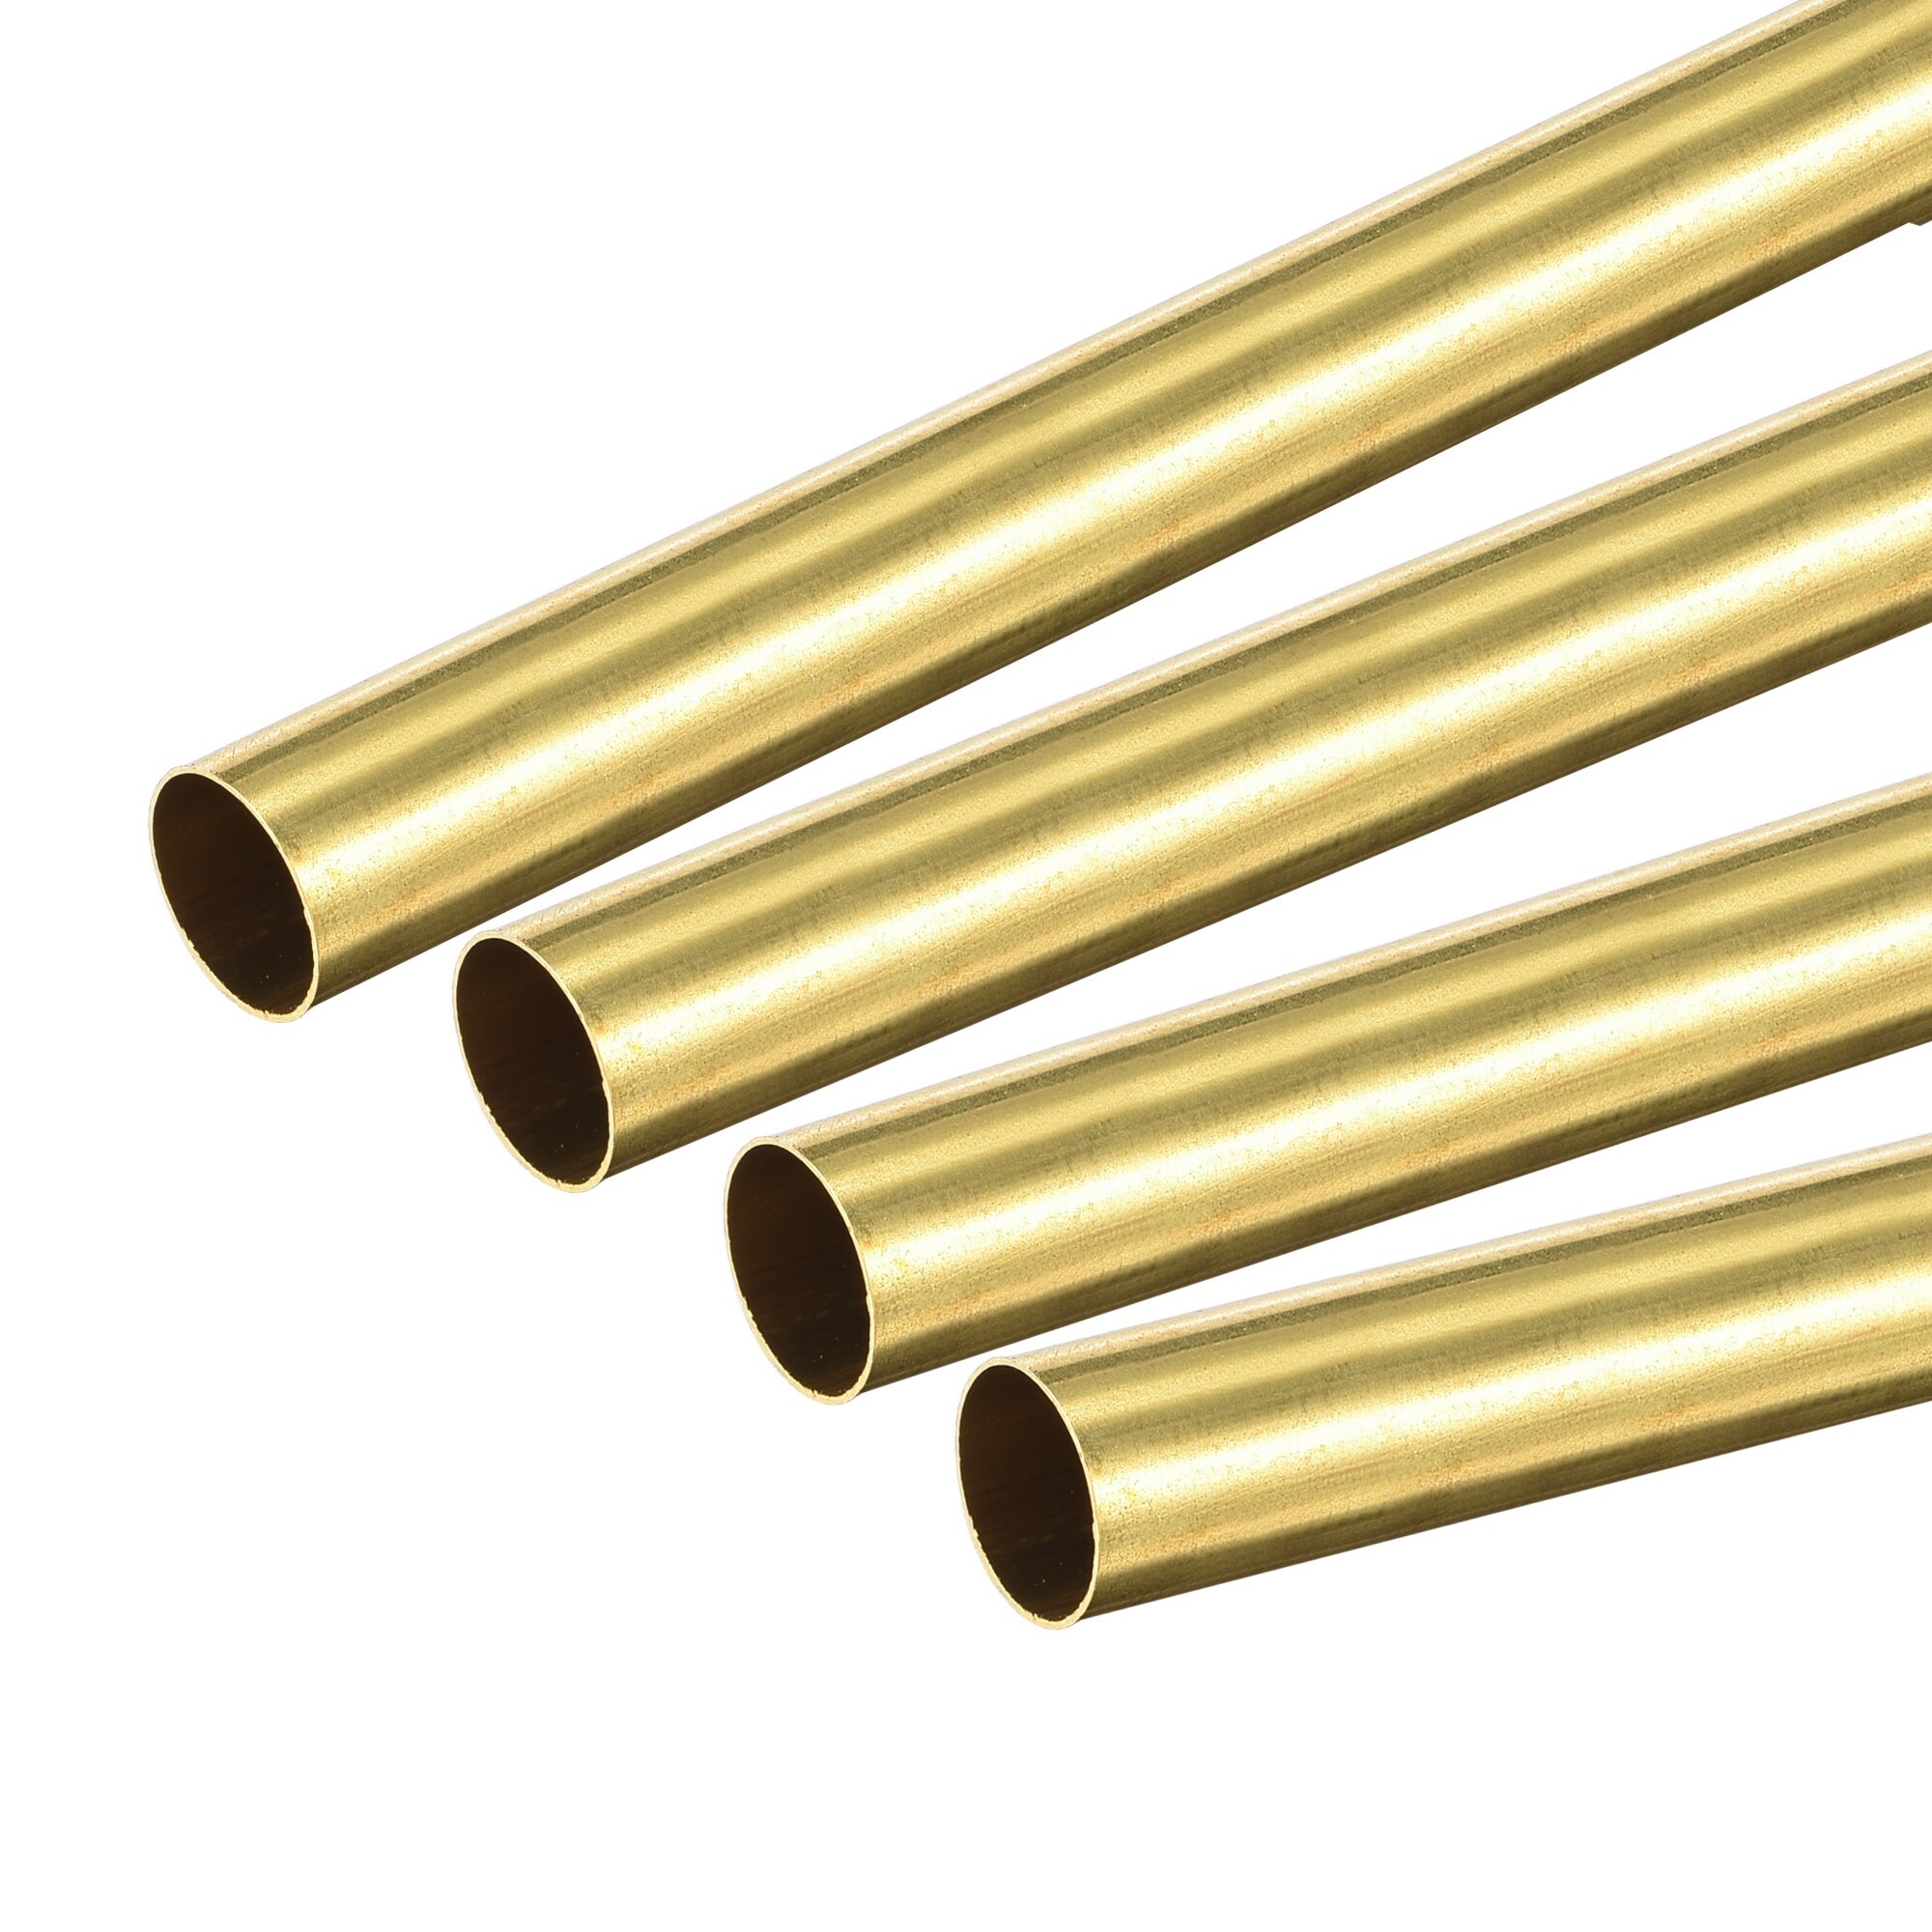 Brass Round Tube 300mm Length 9mm OD 0.5mm Wall Thickness Seamless Pipe Tubing 